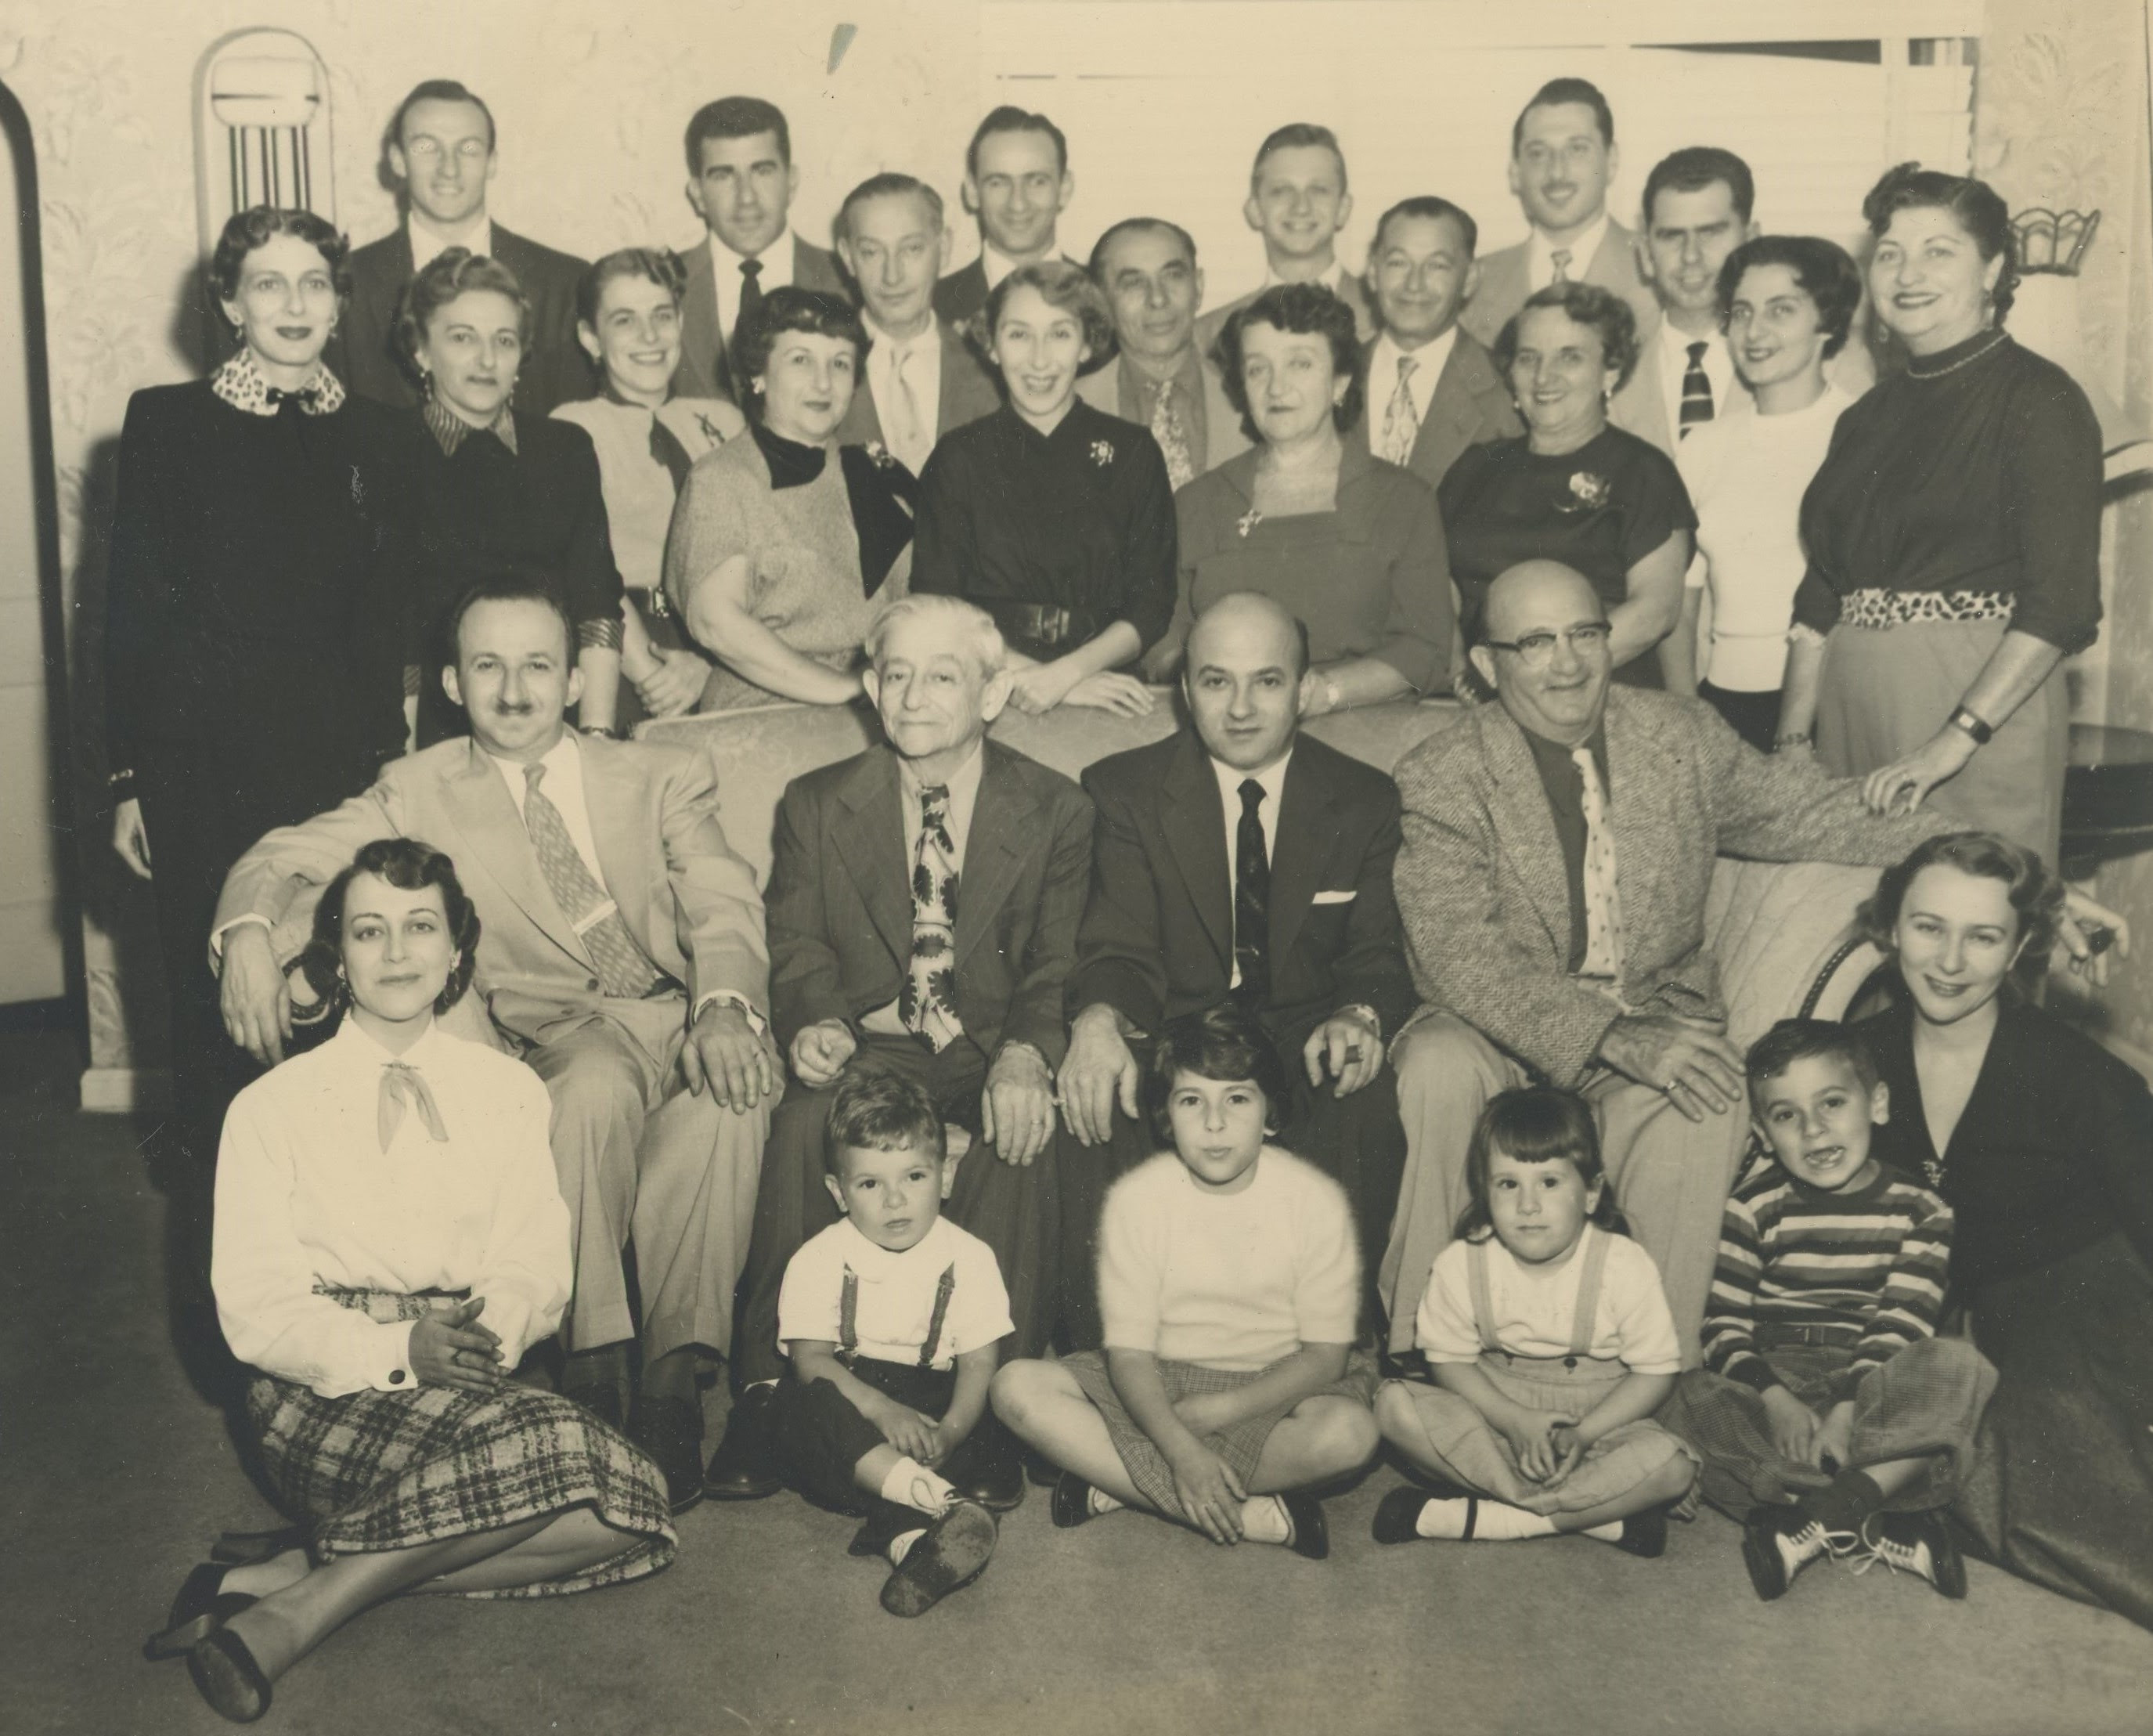 Pictured in this 1957 Cohen Family gathering